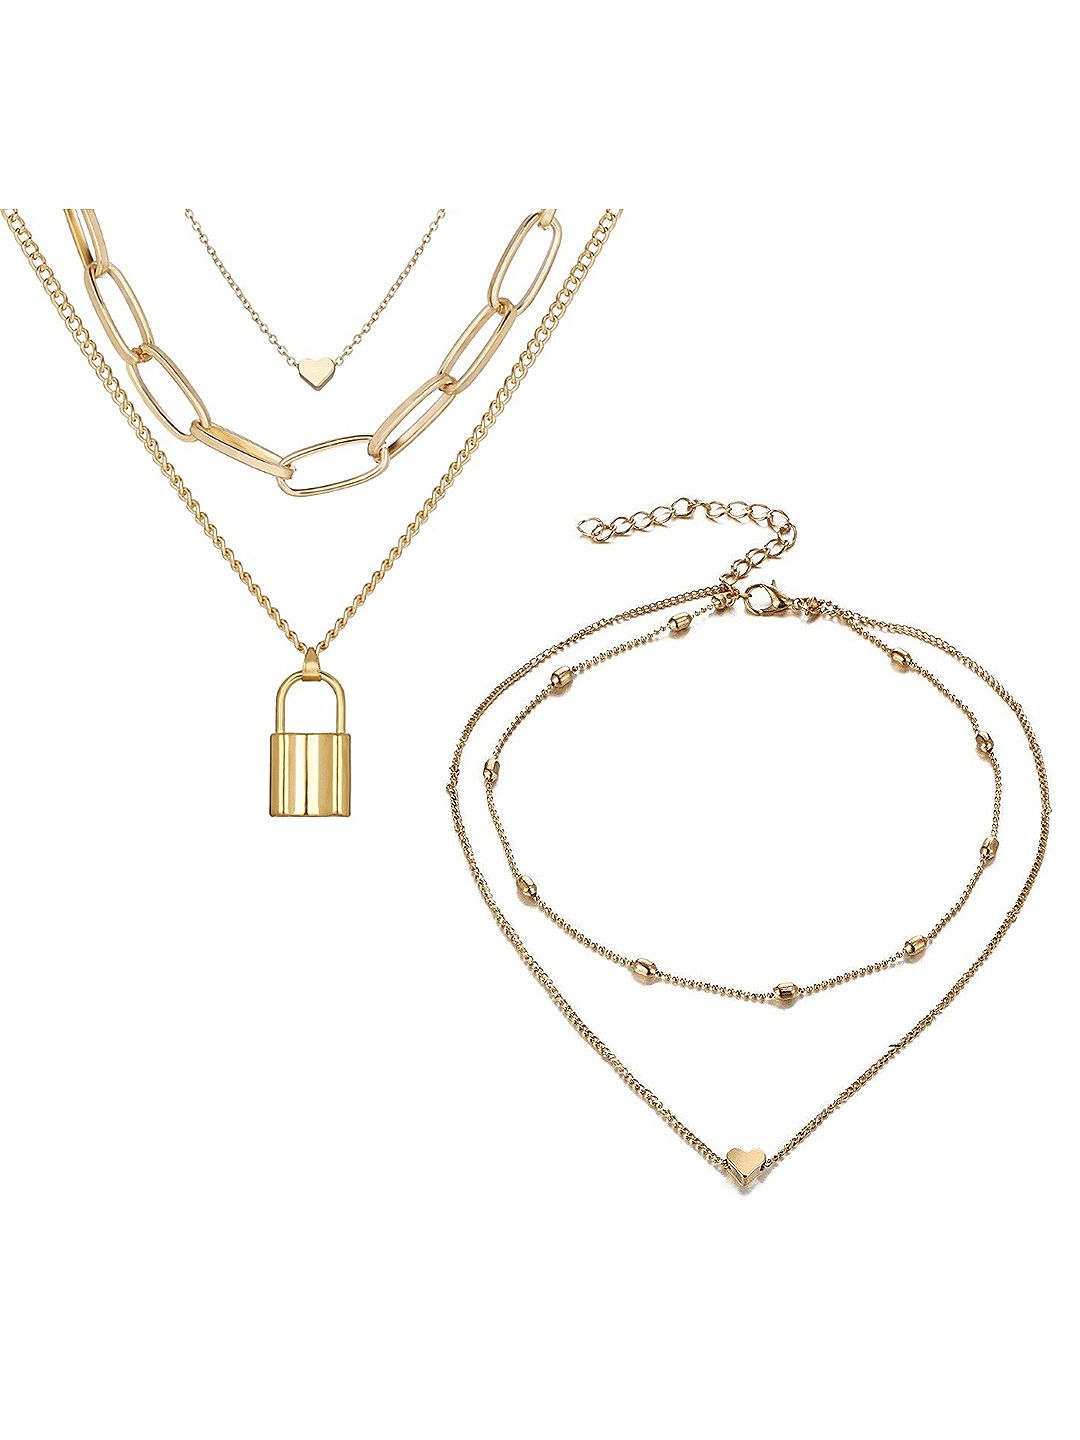 Vembley Set Of 2 Gold-Plated Layered Heart Lock & Heart Pendant Necklace Price in India